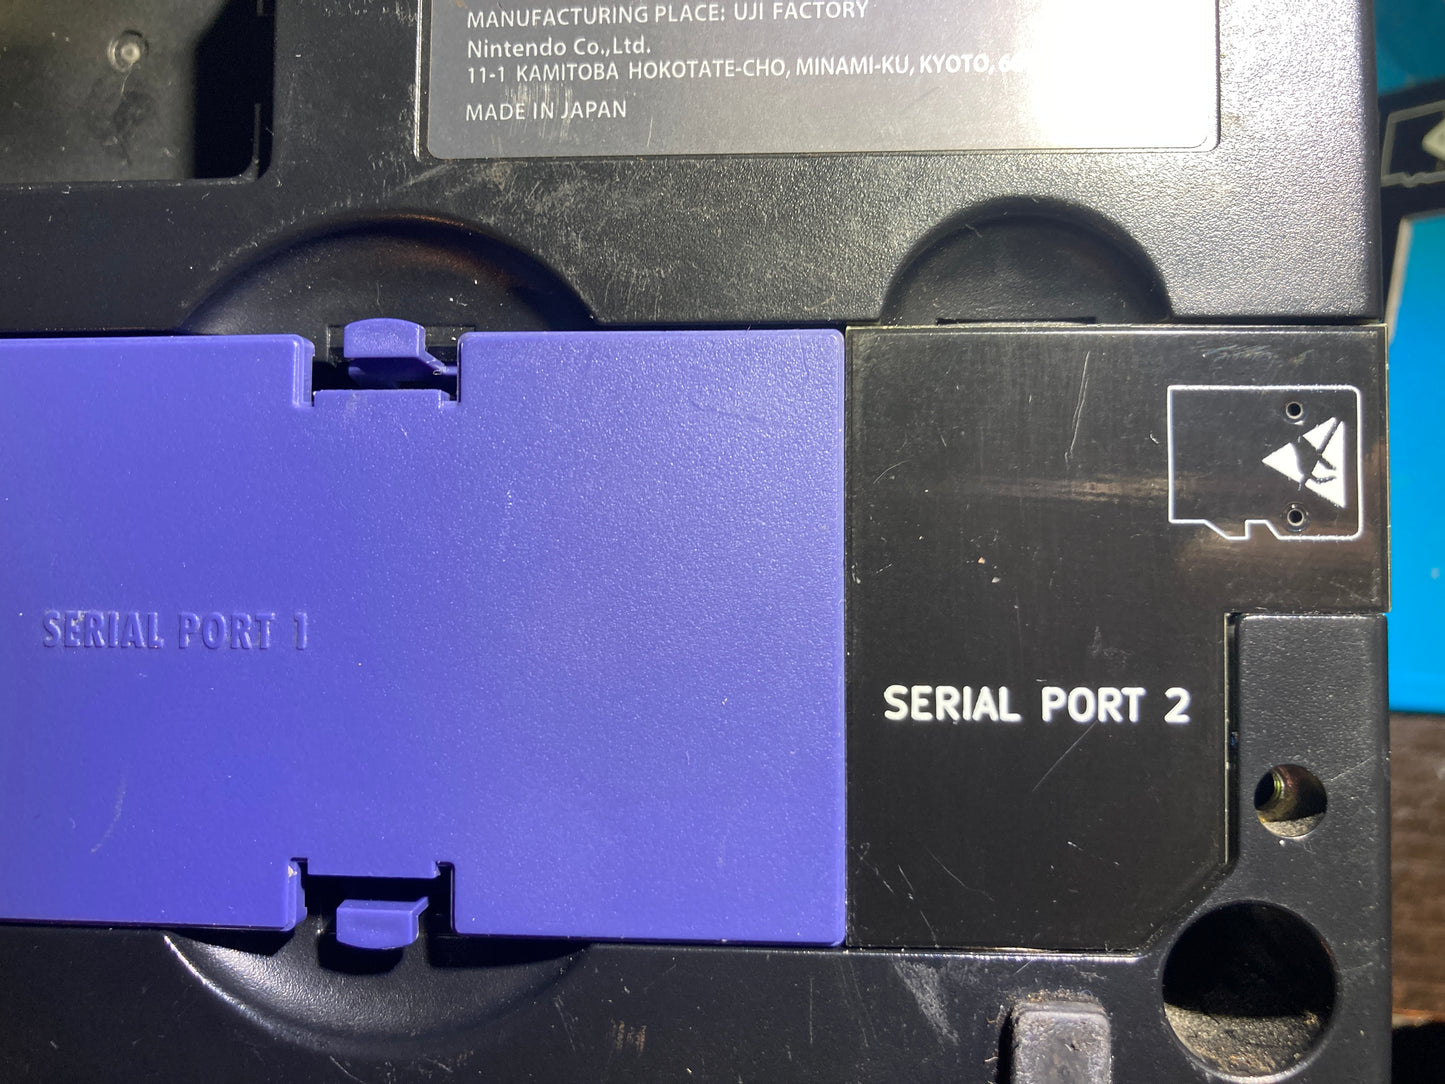 Gamecube - SD2SP2 Adapter for use with GB player